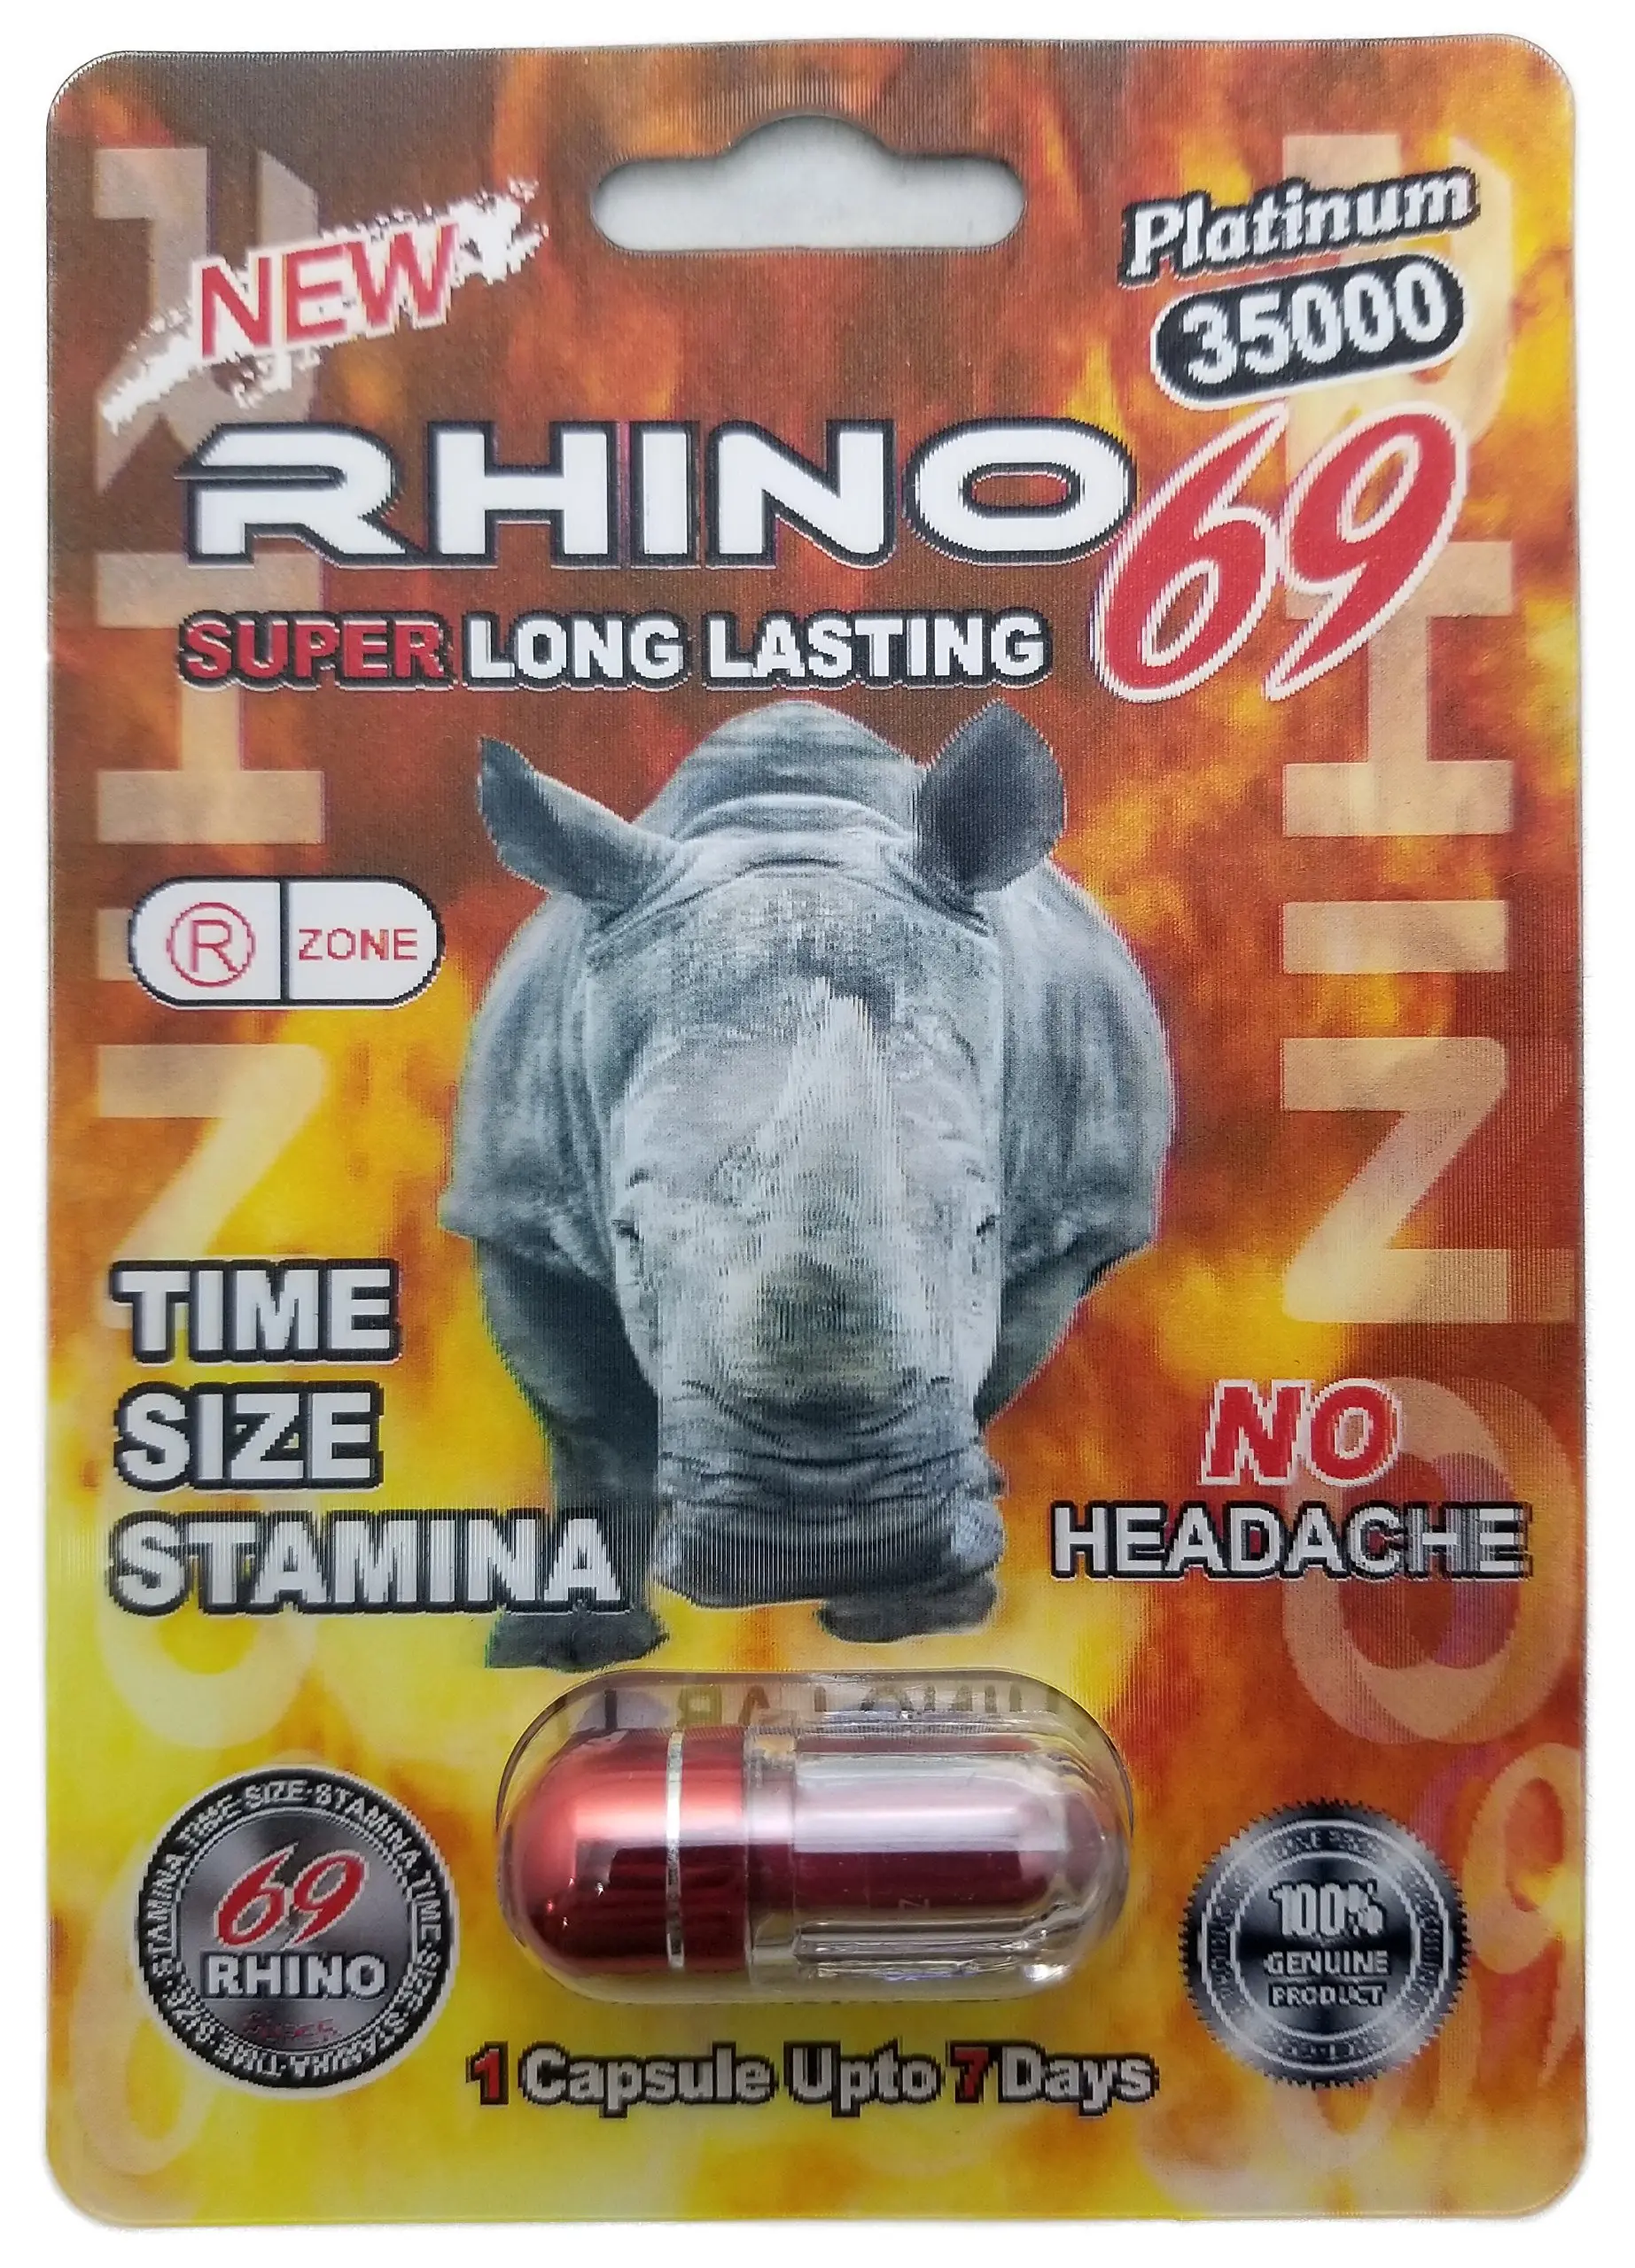 Rhino 69 Extreme 35,000 - Male Enhancement Supplement - 6 Pack (35K) .